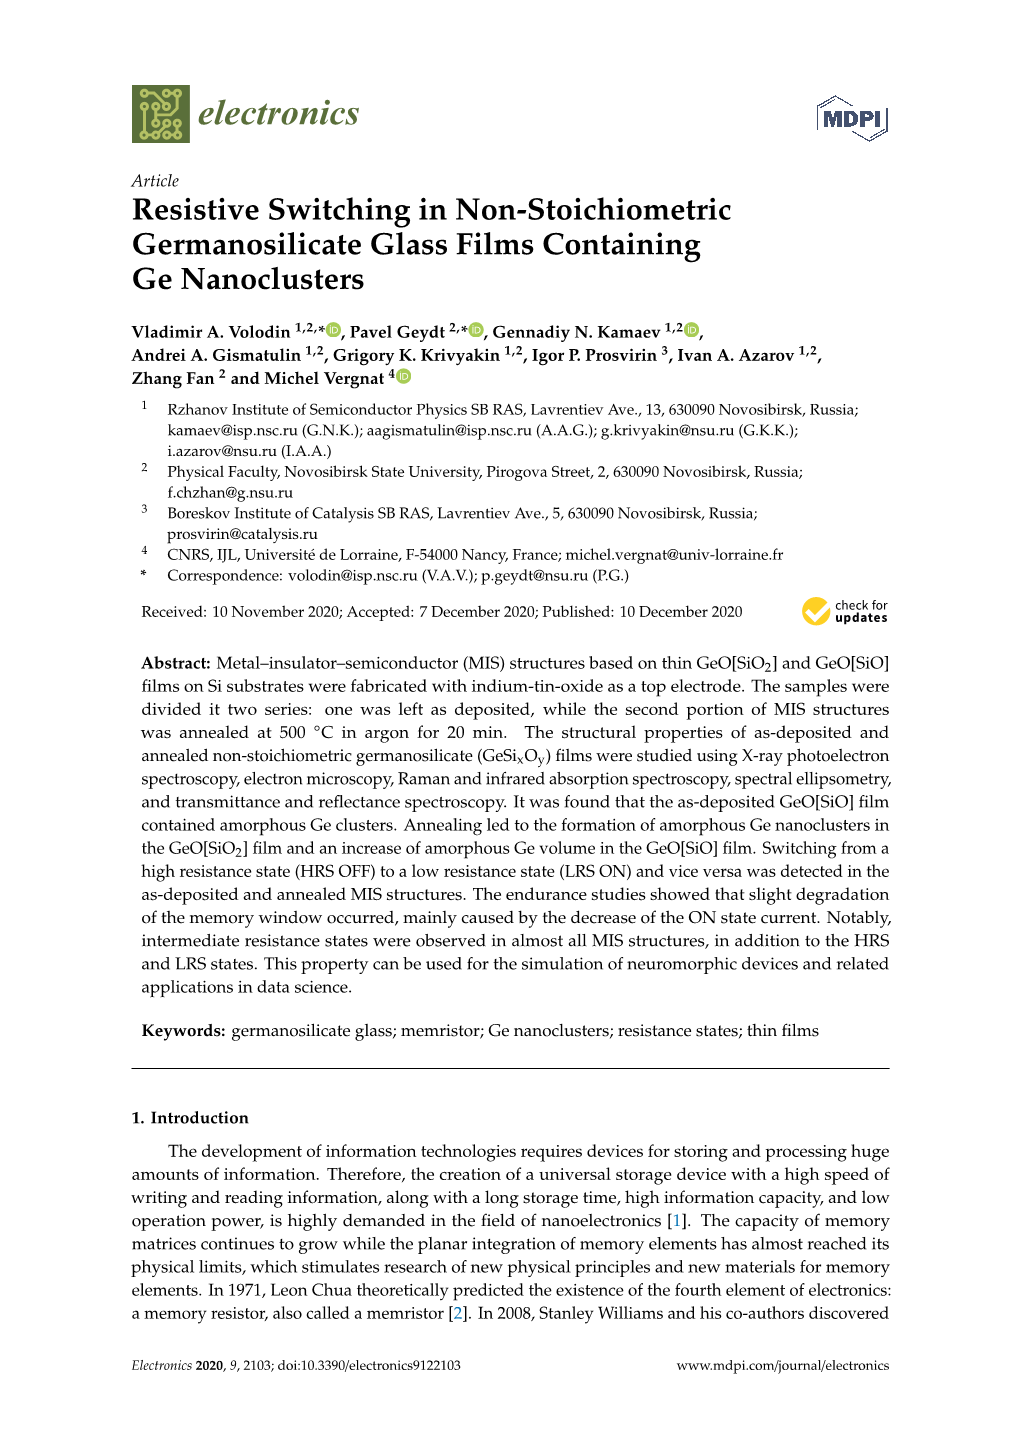 Resistive Switching in Non-Stoichiometric Germanosilicate Glass Films Containing Ge Nanoclusters